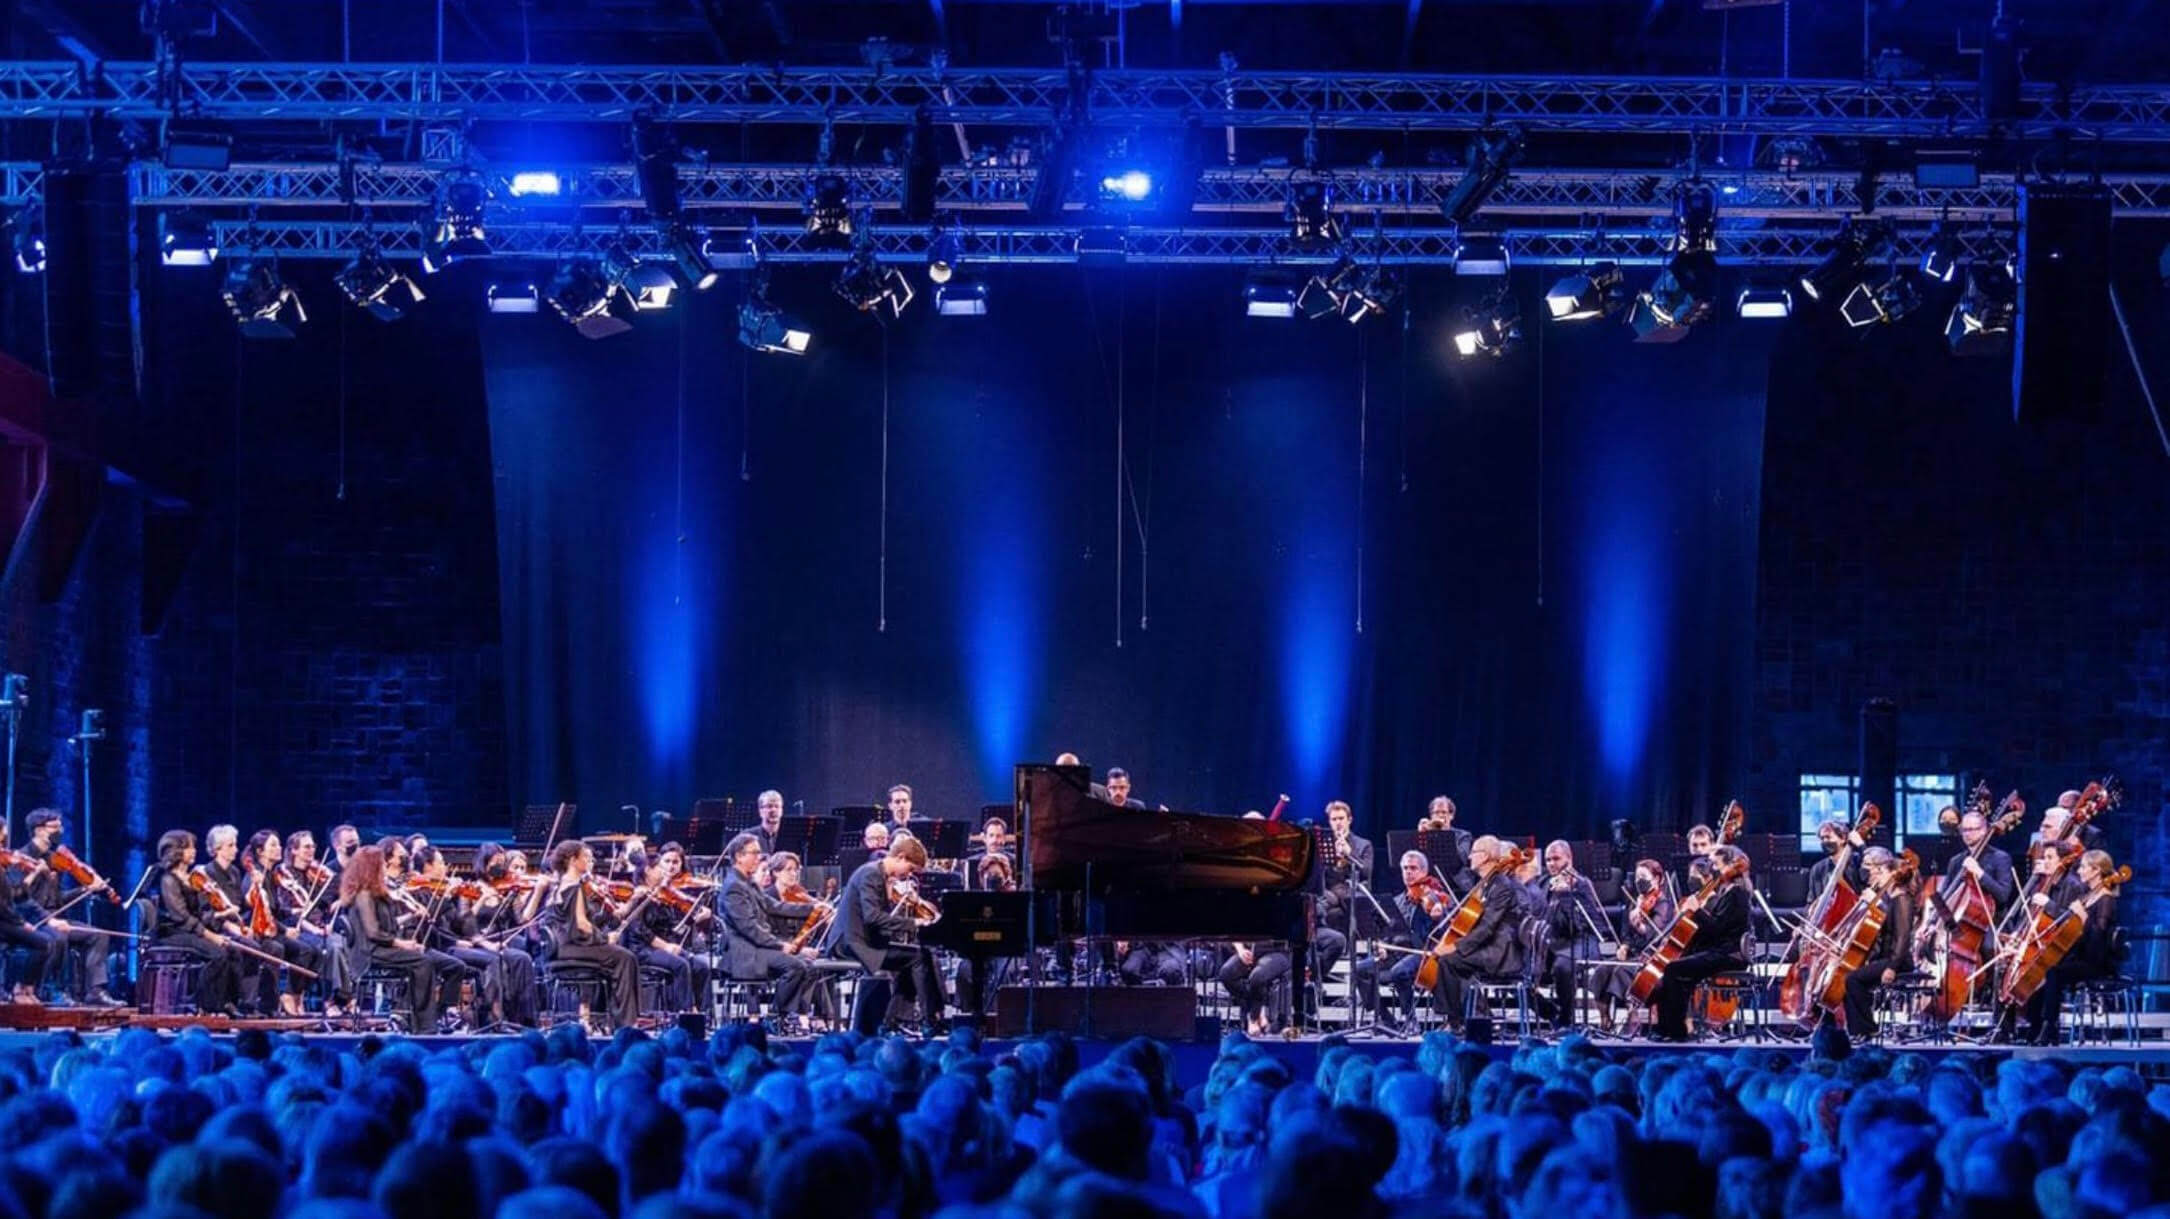 The New York Philharmonic performs at the Usedom Music Festival